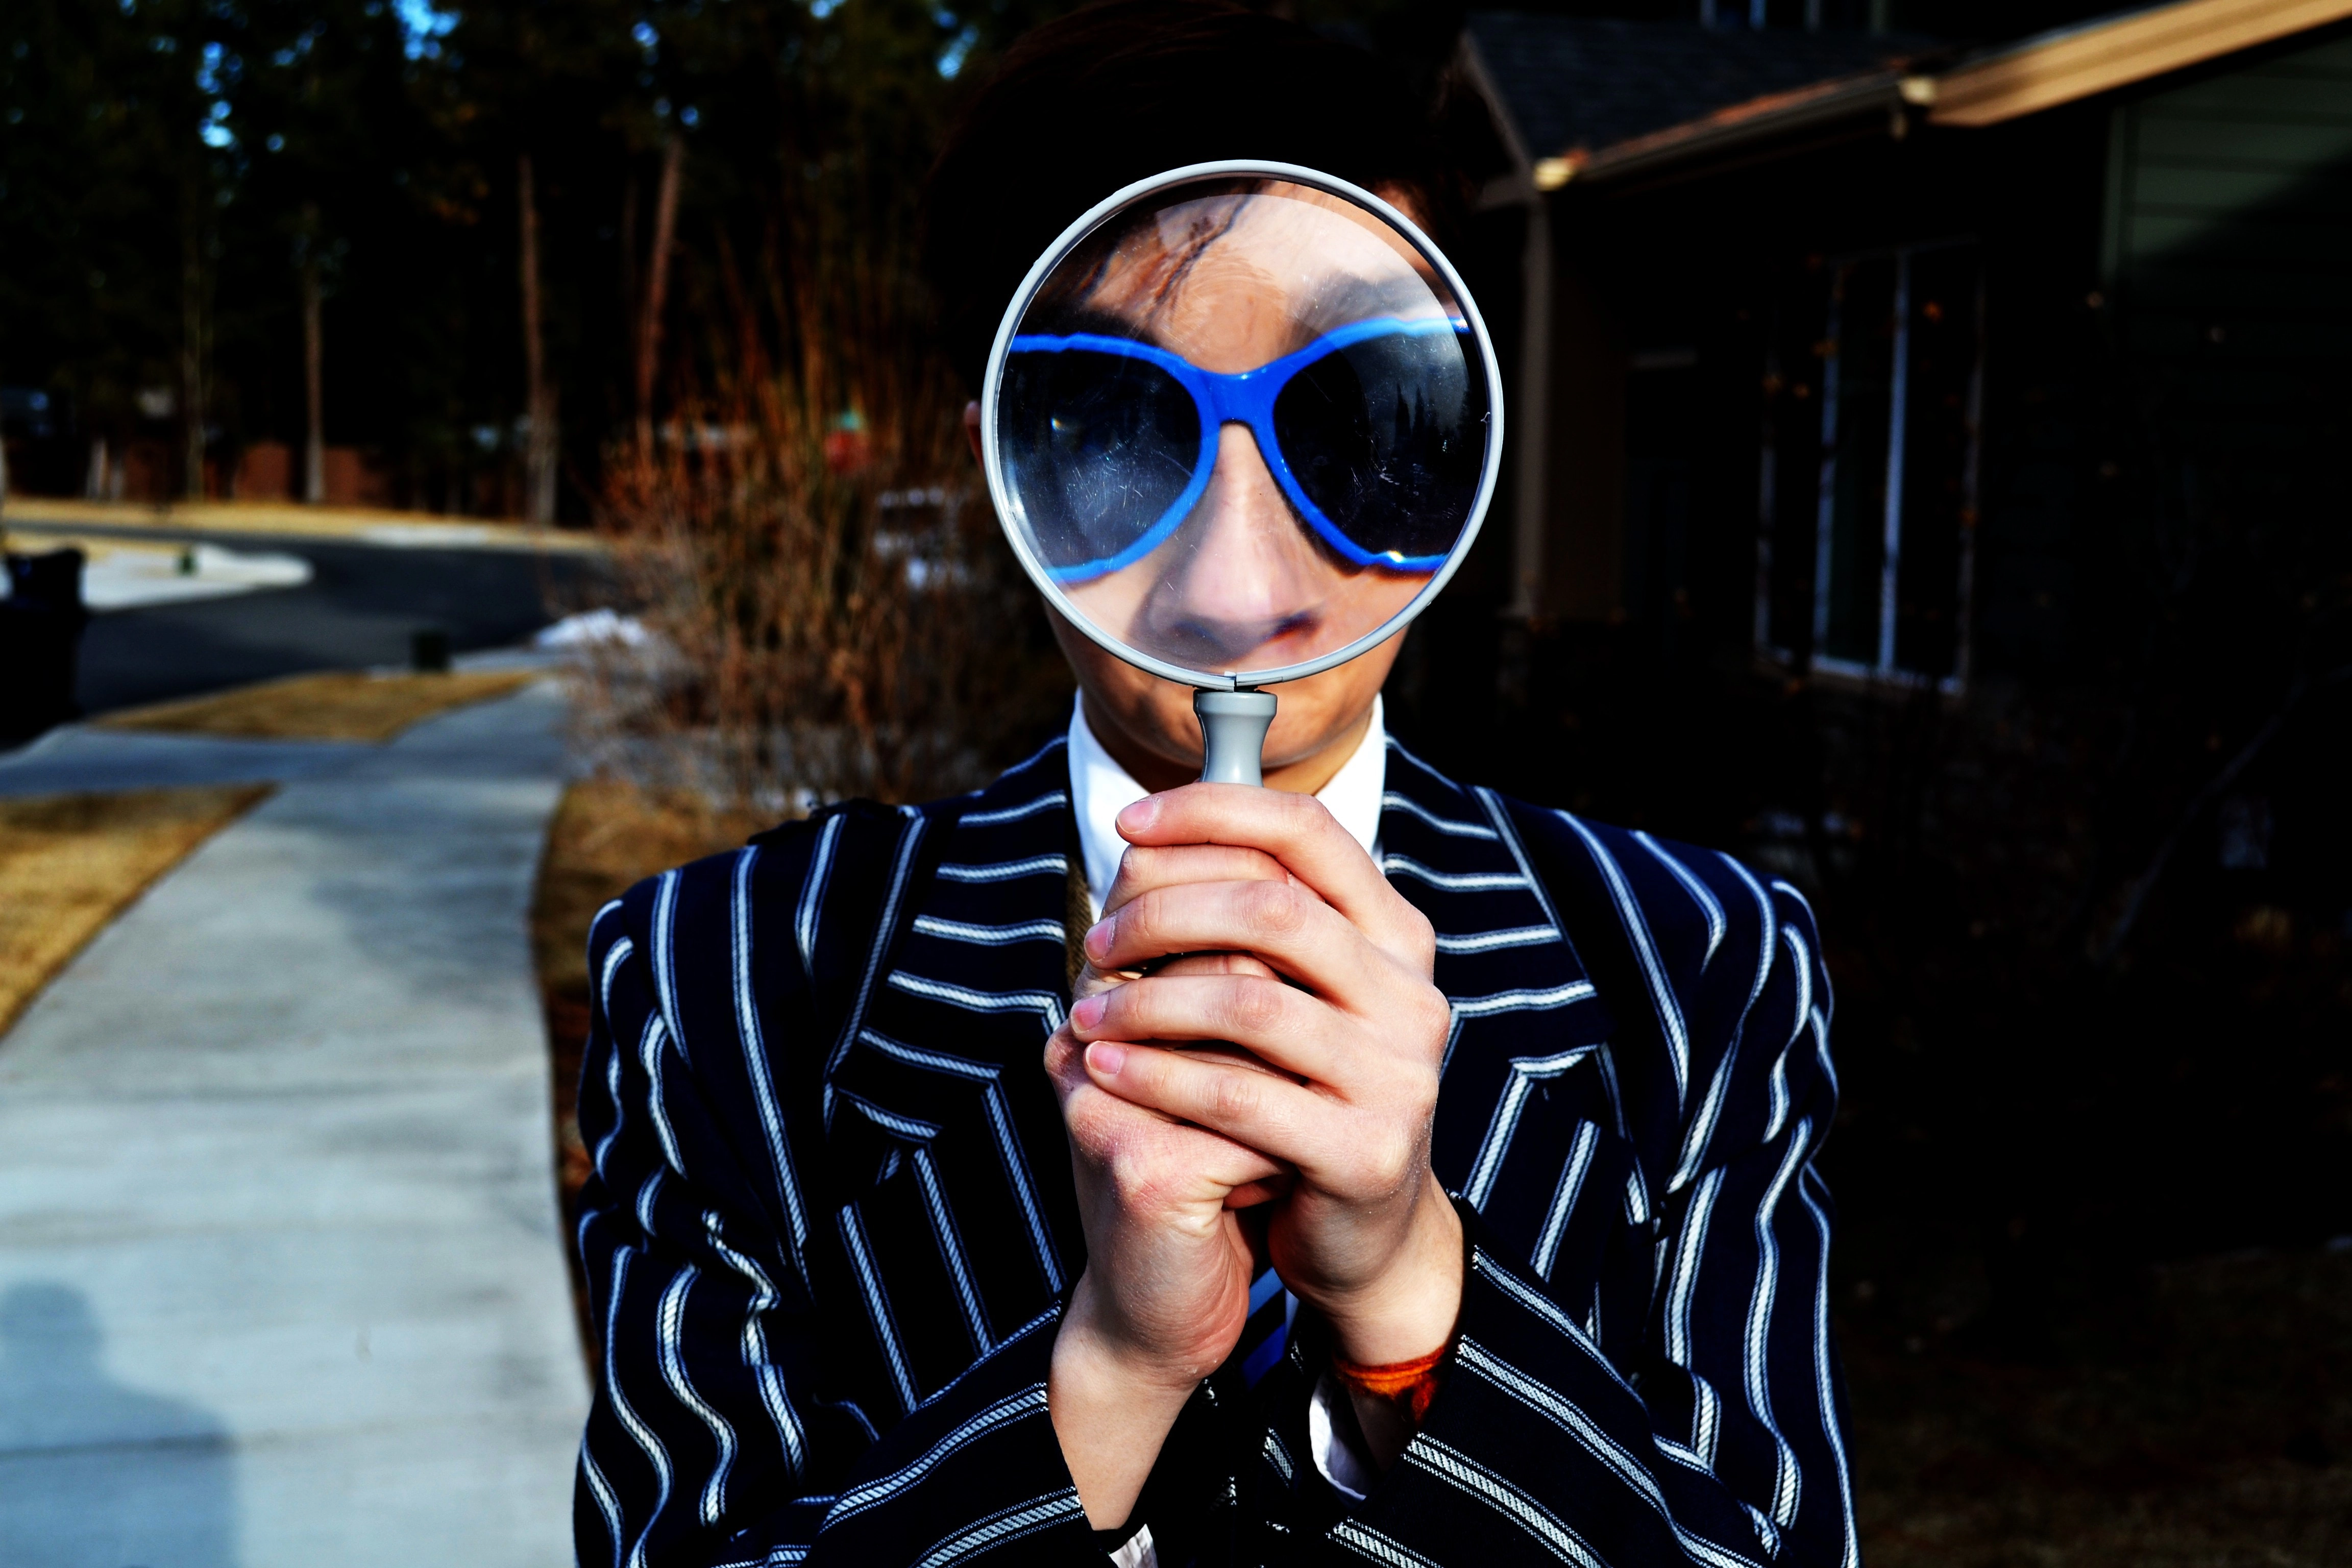 A man holds a magnifying glass in front of his face